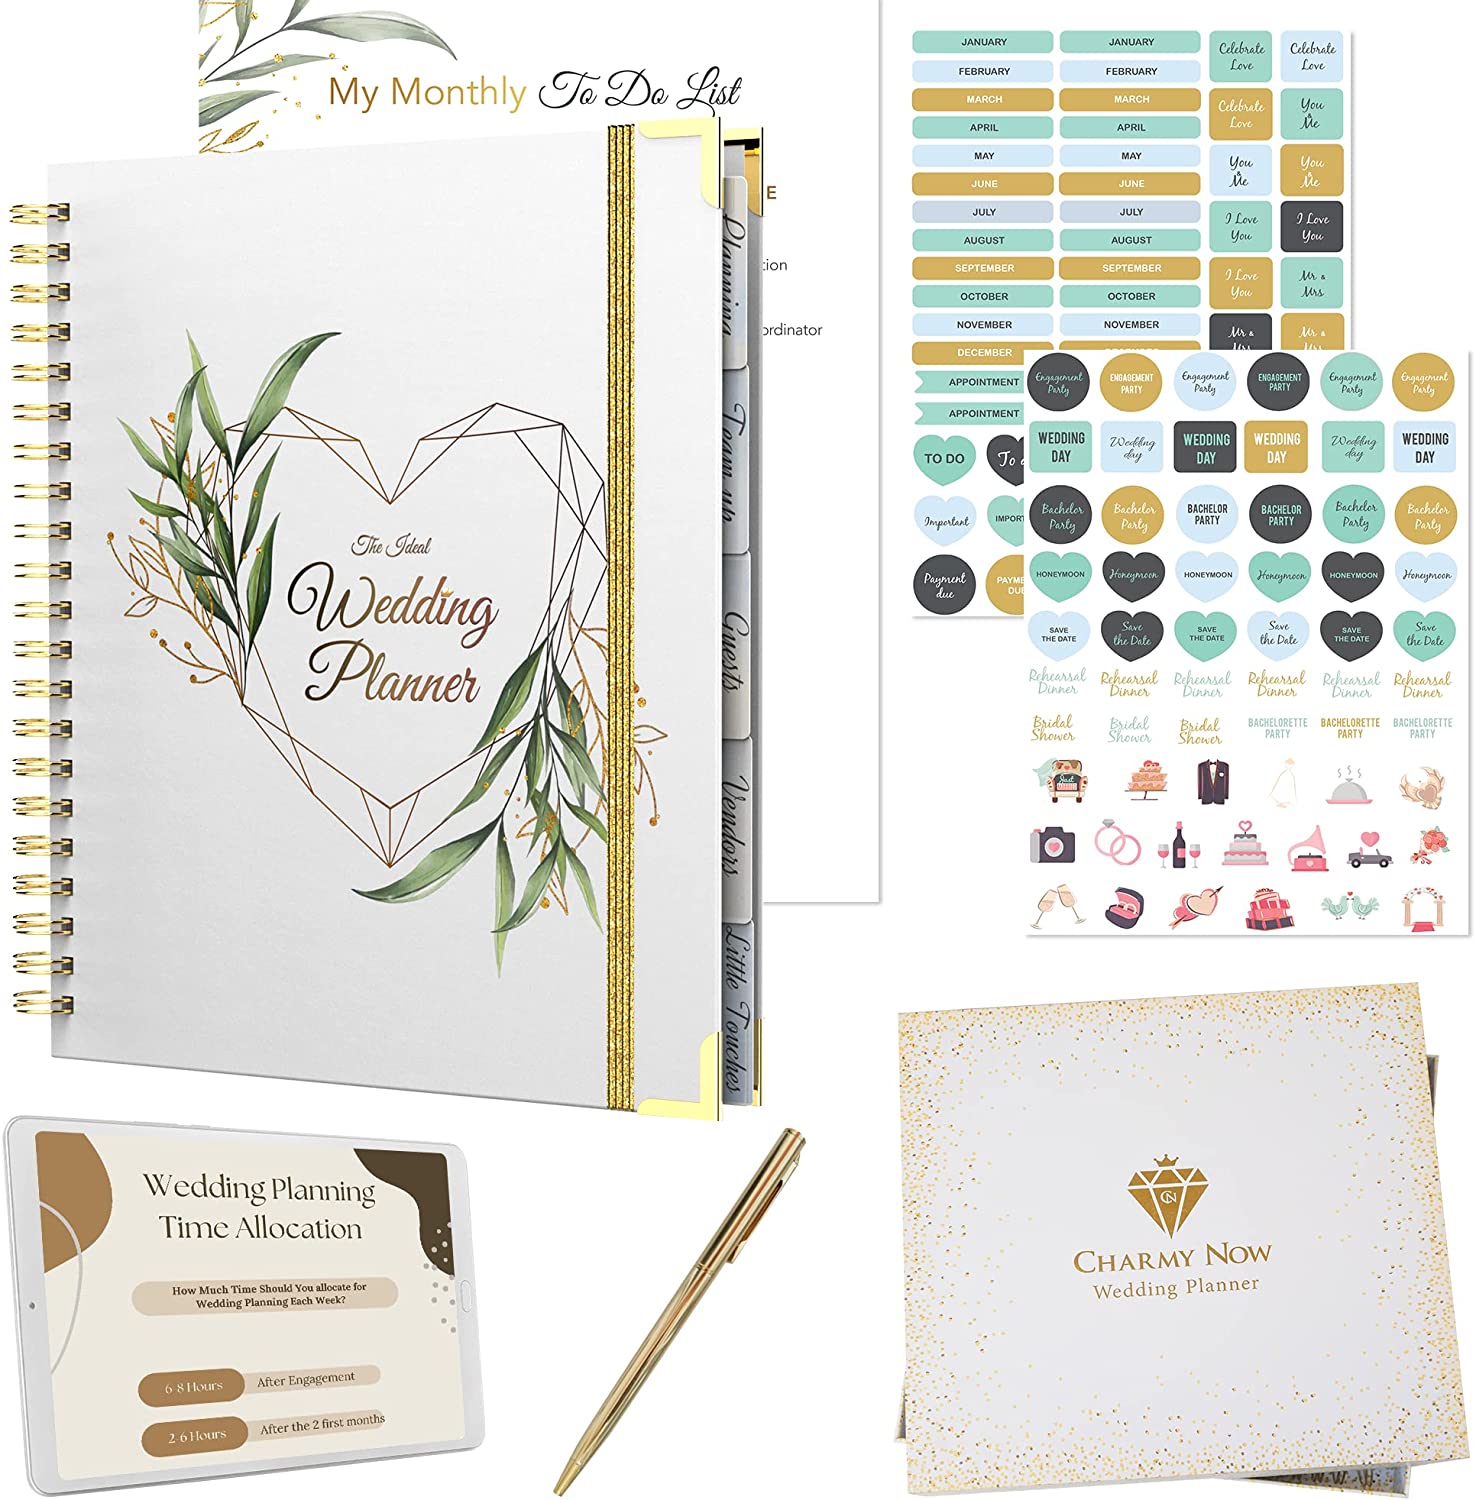 Wedding Planner Book and Organizer For The Bride - Gold Kit with Stickers, Pen & Gift Box | Future Mrs Gifts Wedding Planning Book | Engagement Gifts for Women | Bride To Be Gifts for Her by CHARMY NOW on Amazon